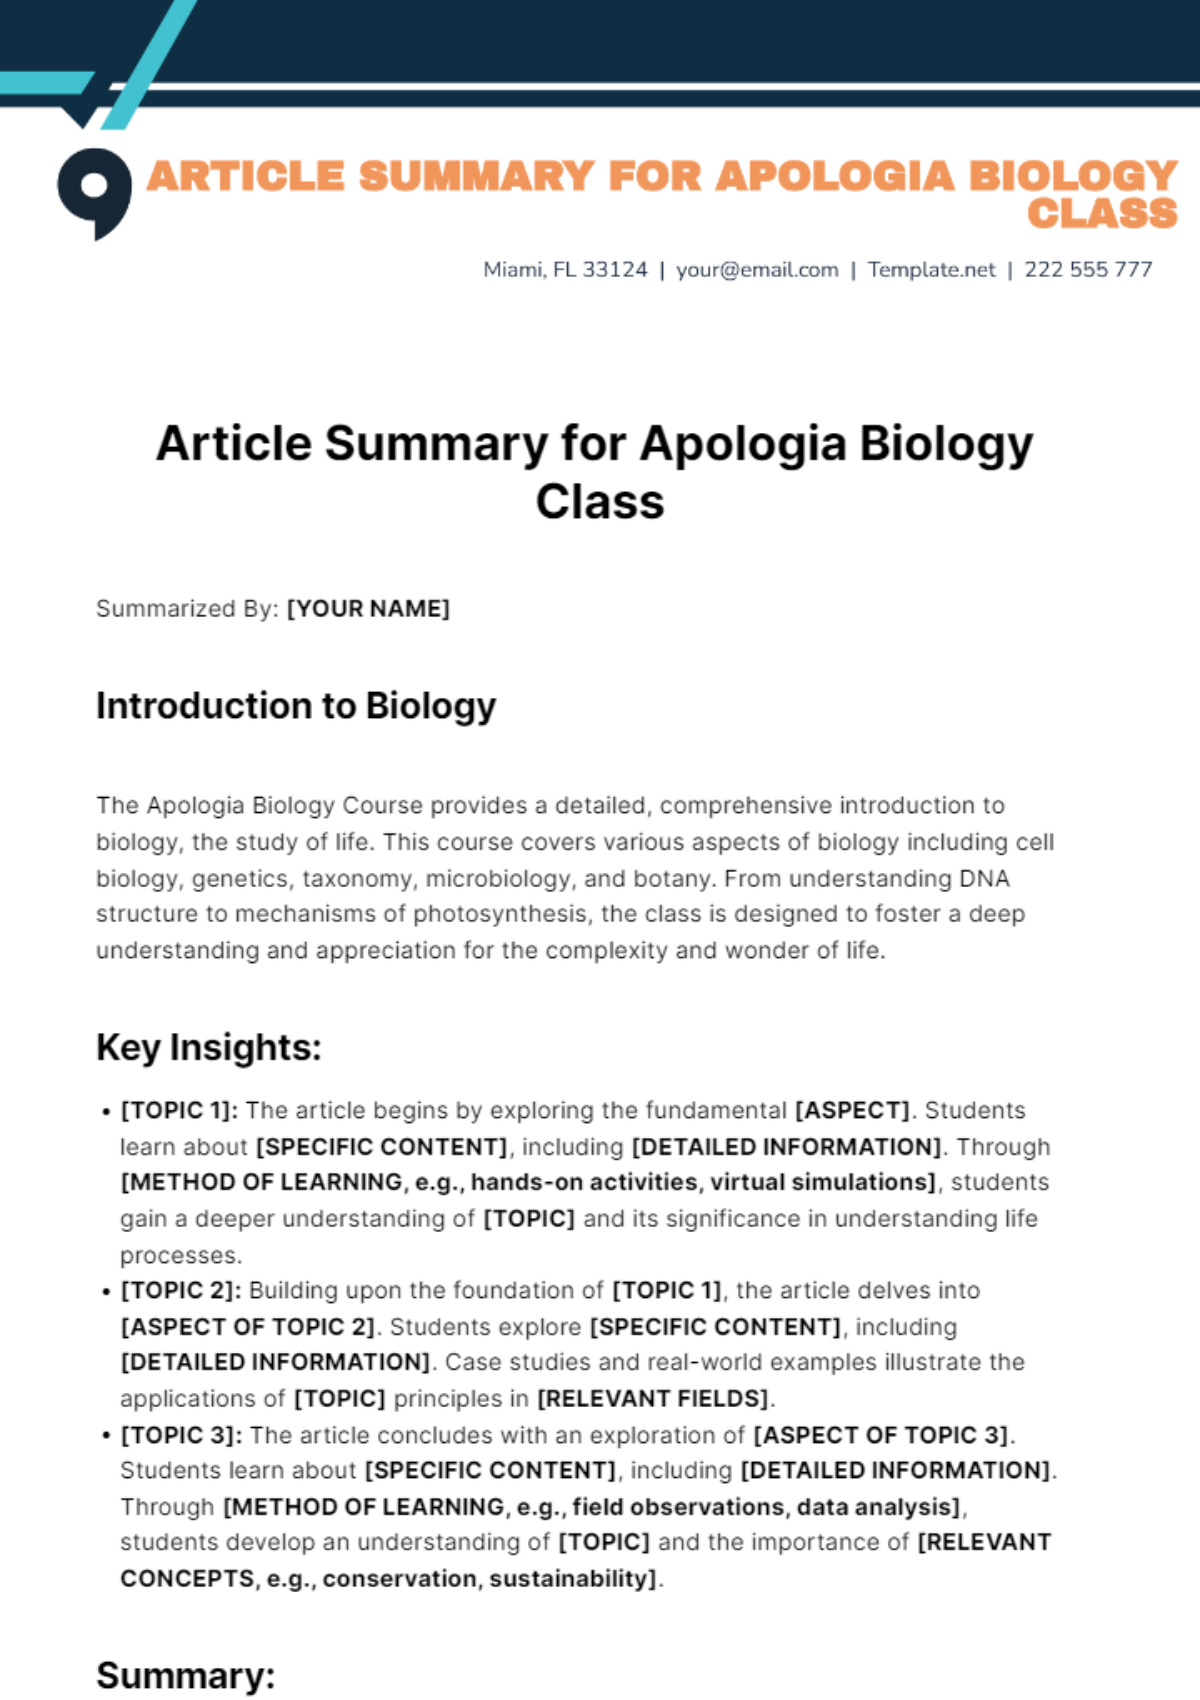 Article Summary for Apologia Biology Class Template